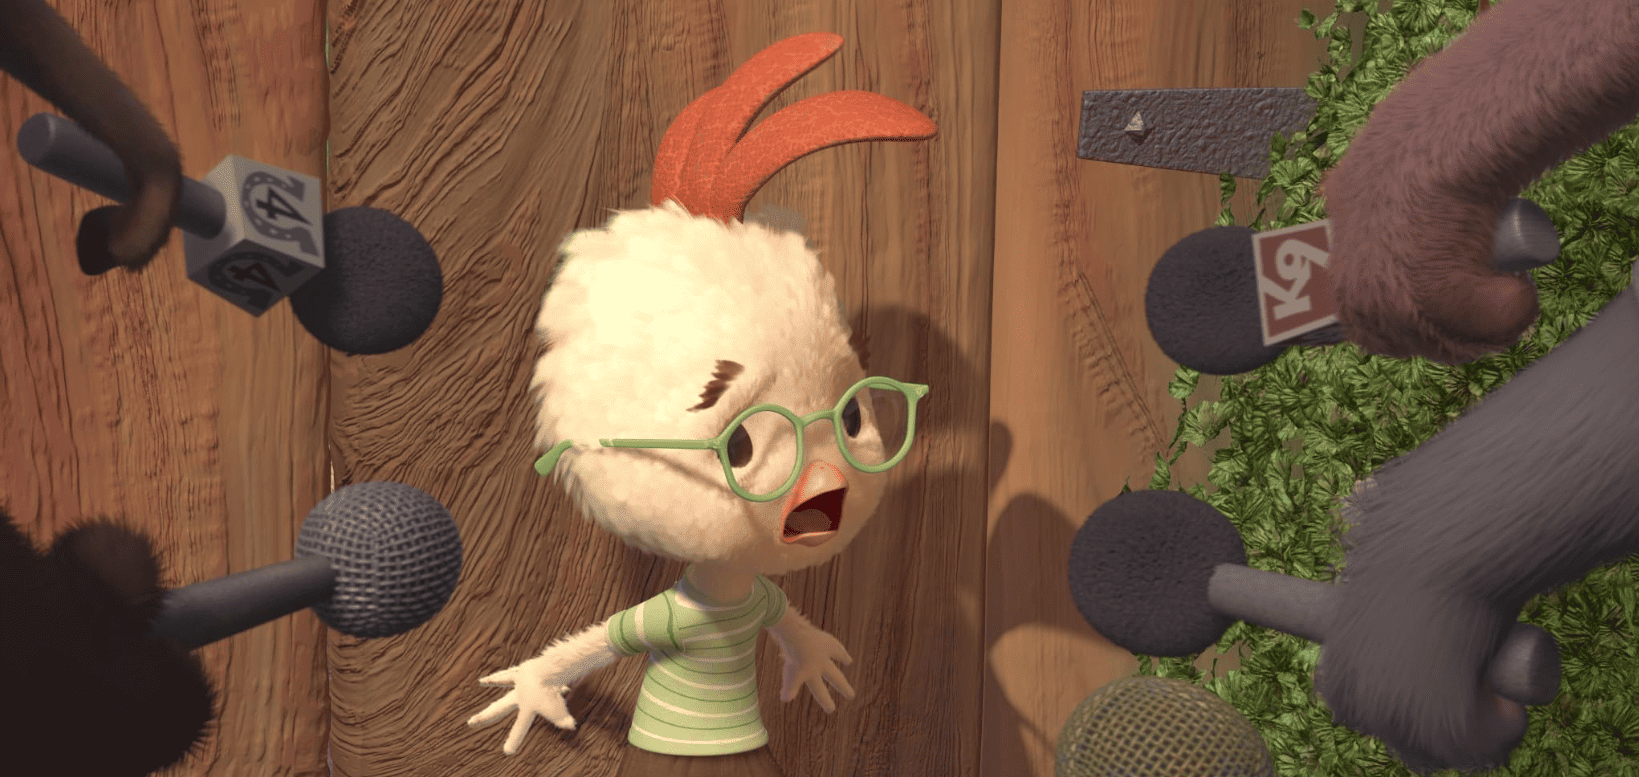 Chicken Little with a worried look on his face in front of reporters in this image from Walt Disney Animation Studios